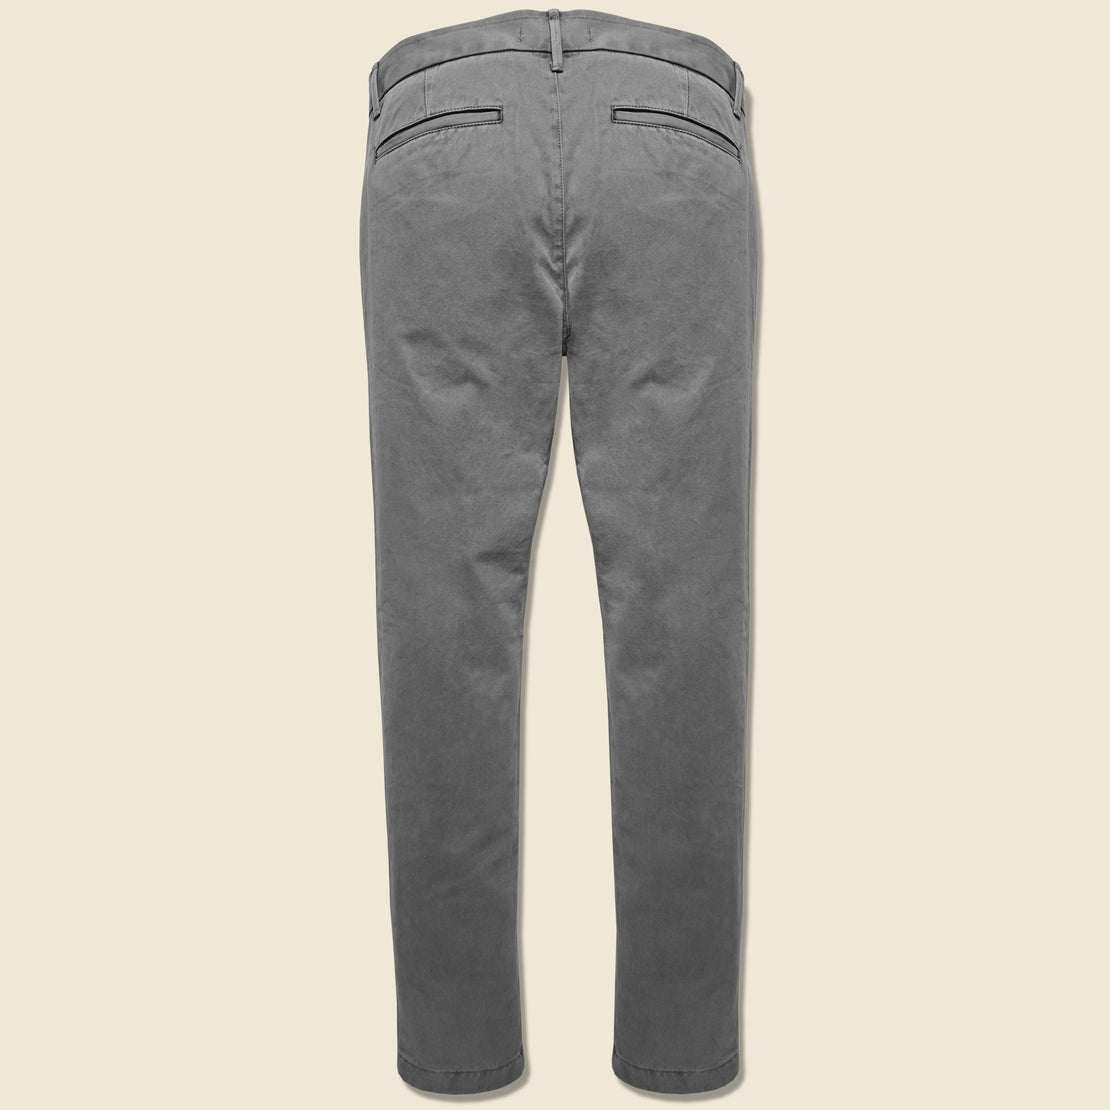 Weekend Chino - Grey - Life After Denim - STAG Provisions - Pants - Twill